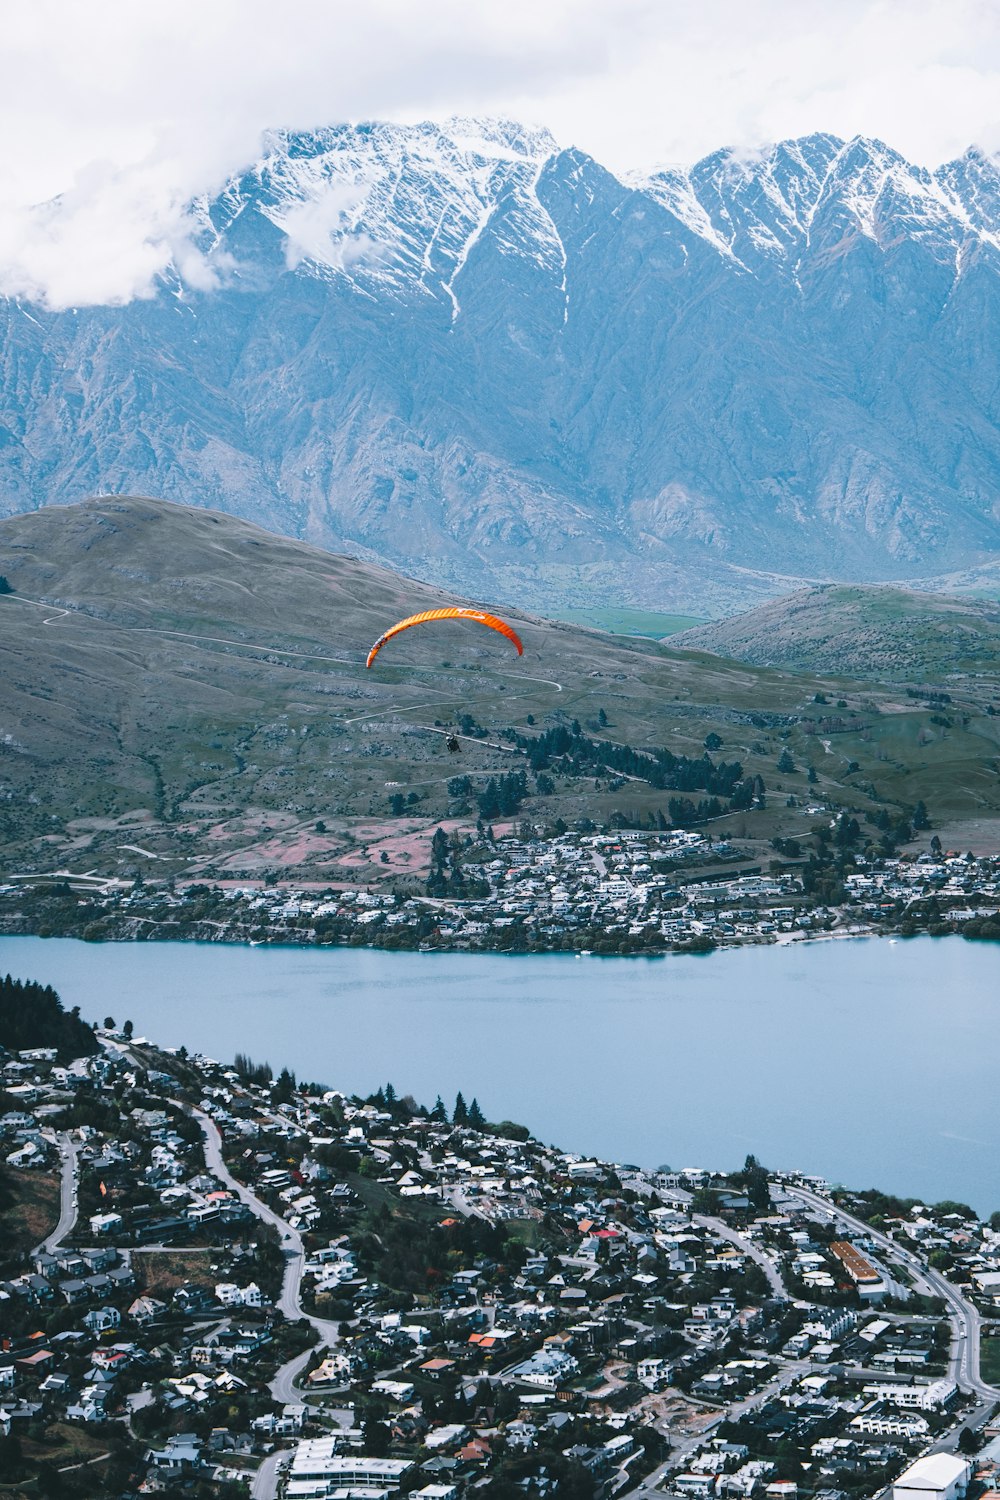 a paraglider flying over a city with mountains in the background